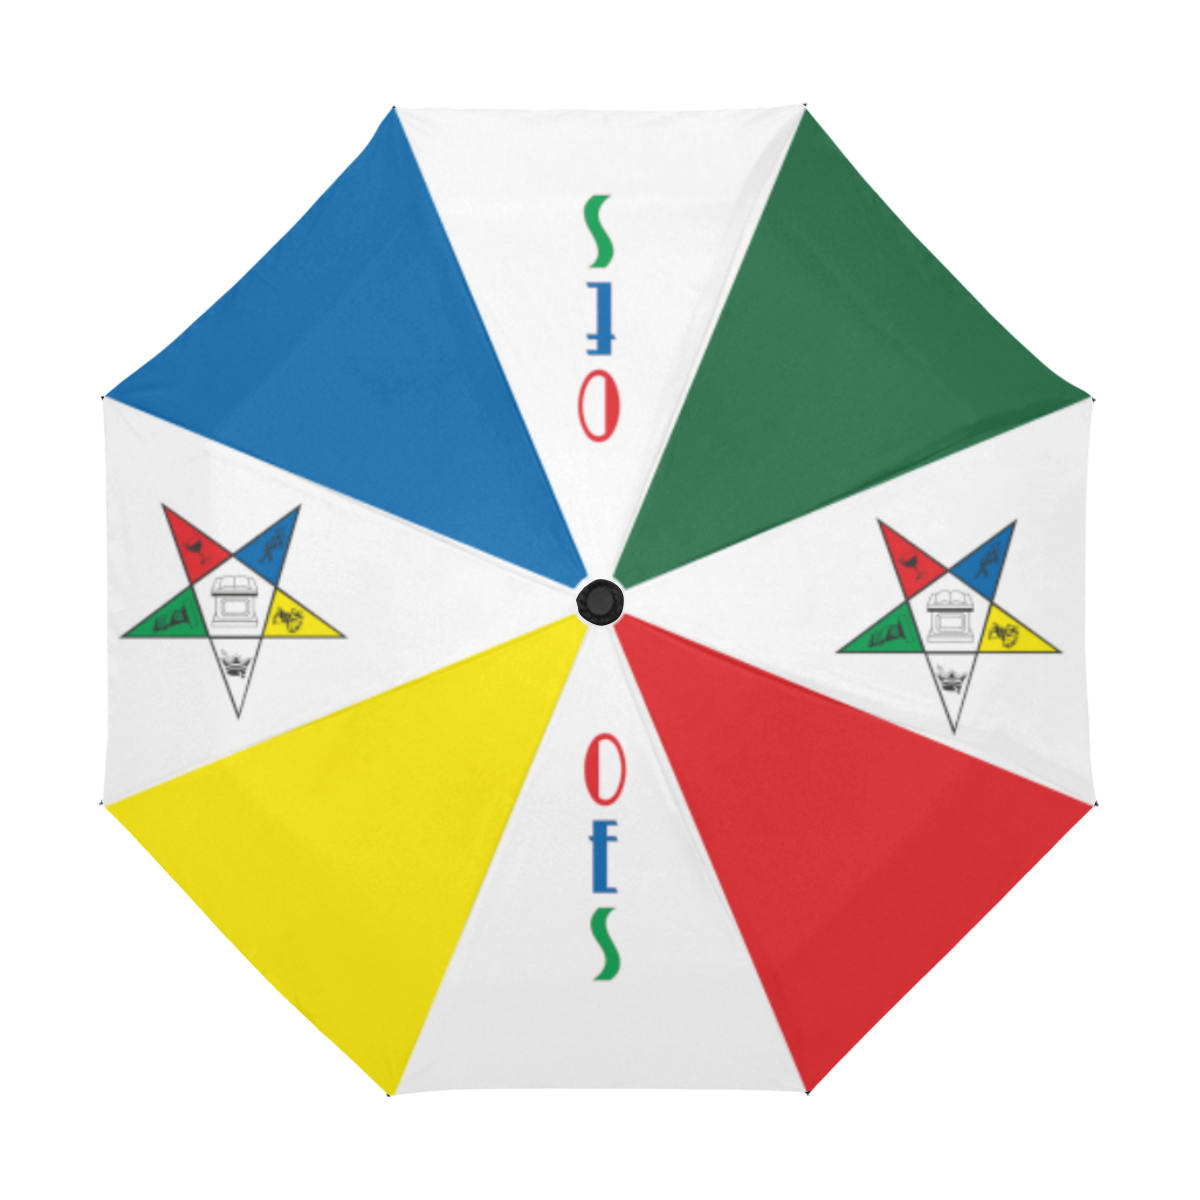 Colorful umbrella with geometric patterns and symbols.